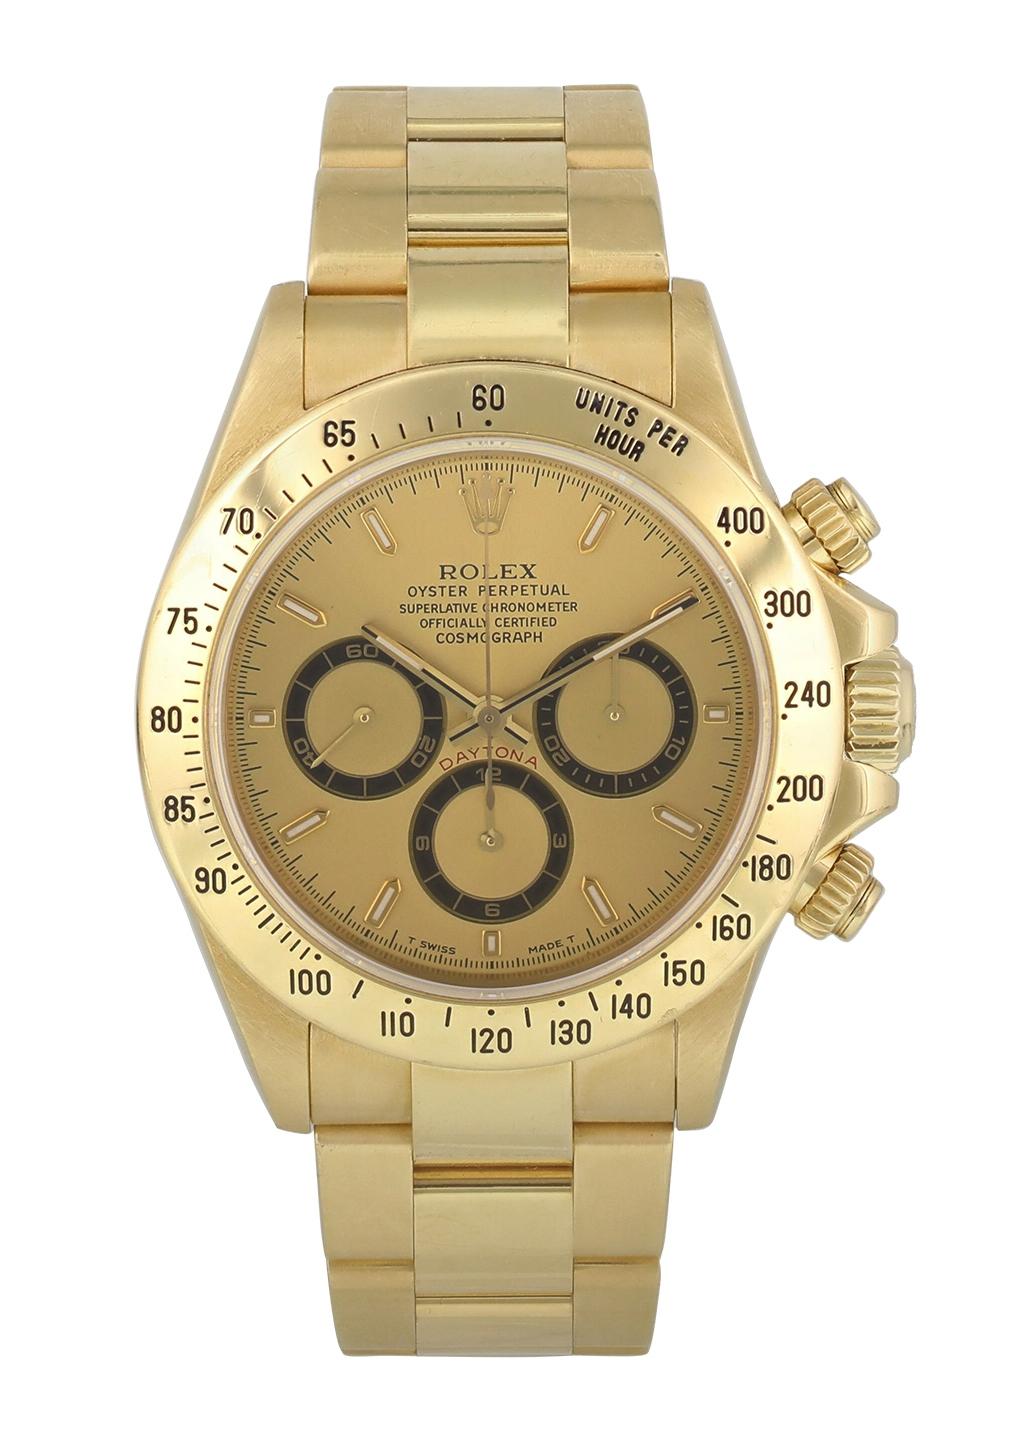 Rolex Zenith Daytona 16528 Mens Watch. 
40mm 18k Yellow Gold case. 
Yellow Gold Stationary bezel. 
Champagne dial with Luminous gold hands and index hour markers. 
Minute markers on the outer dial. 
Yellow Gold Bracelet with Fold Over Clasp. 
Will